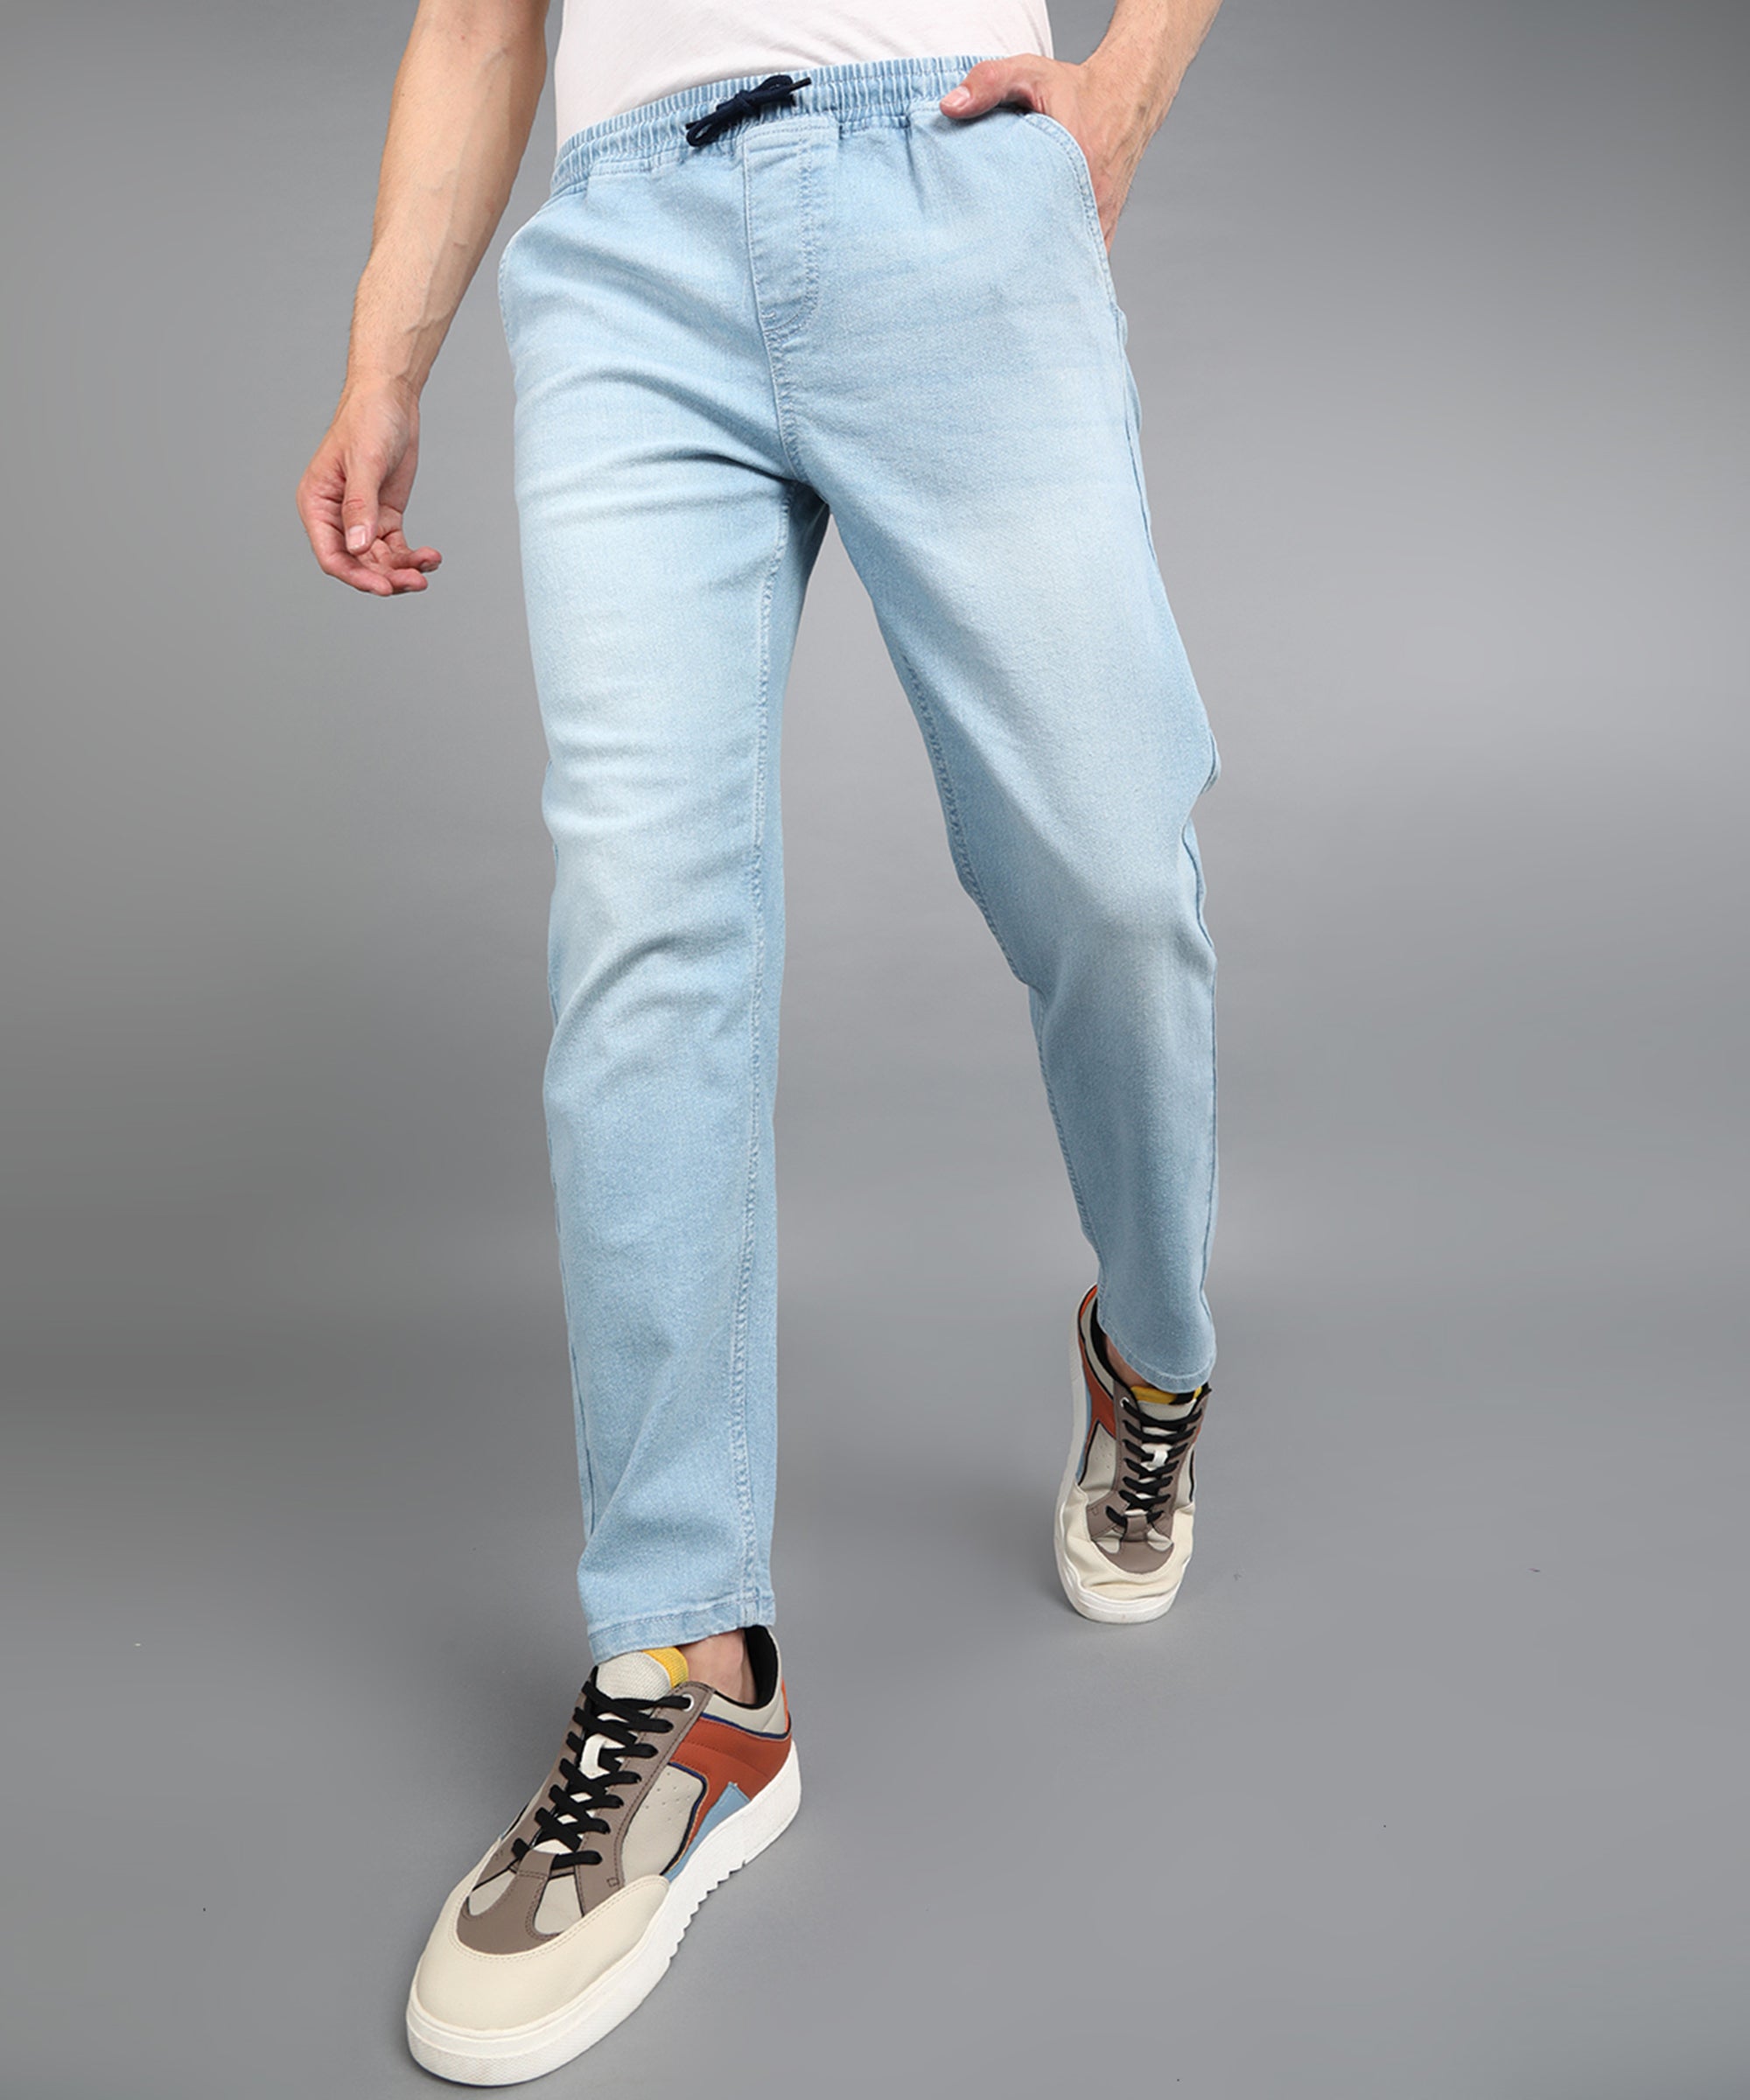 Urbano Fashion Men's Ice Blue Regular Fit Washed Jogger Jeans Stretchable